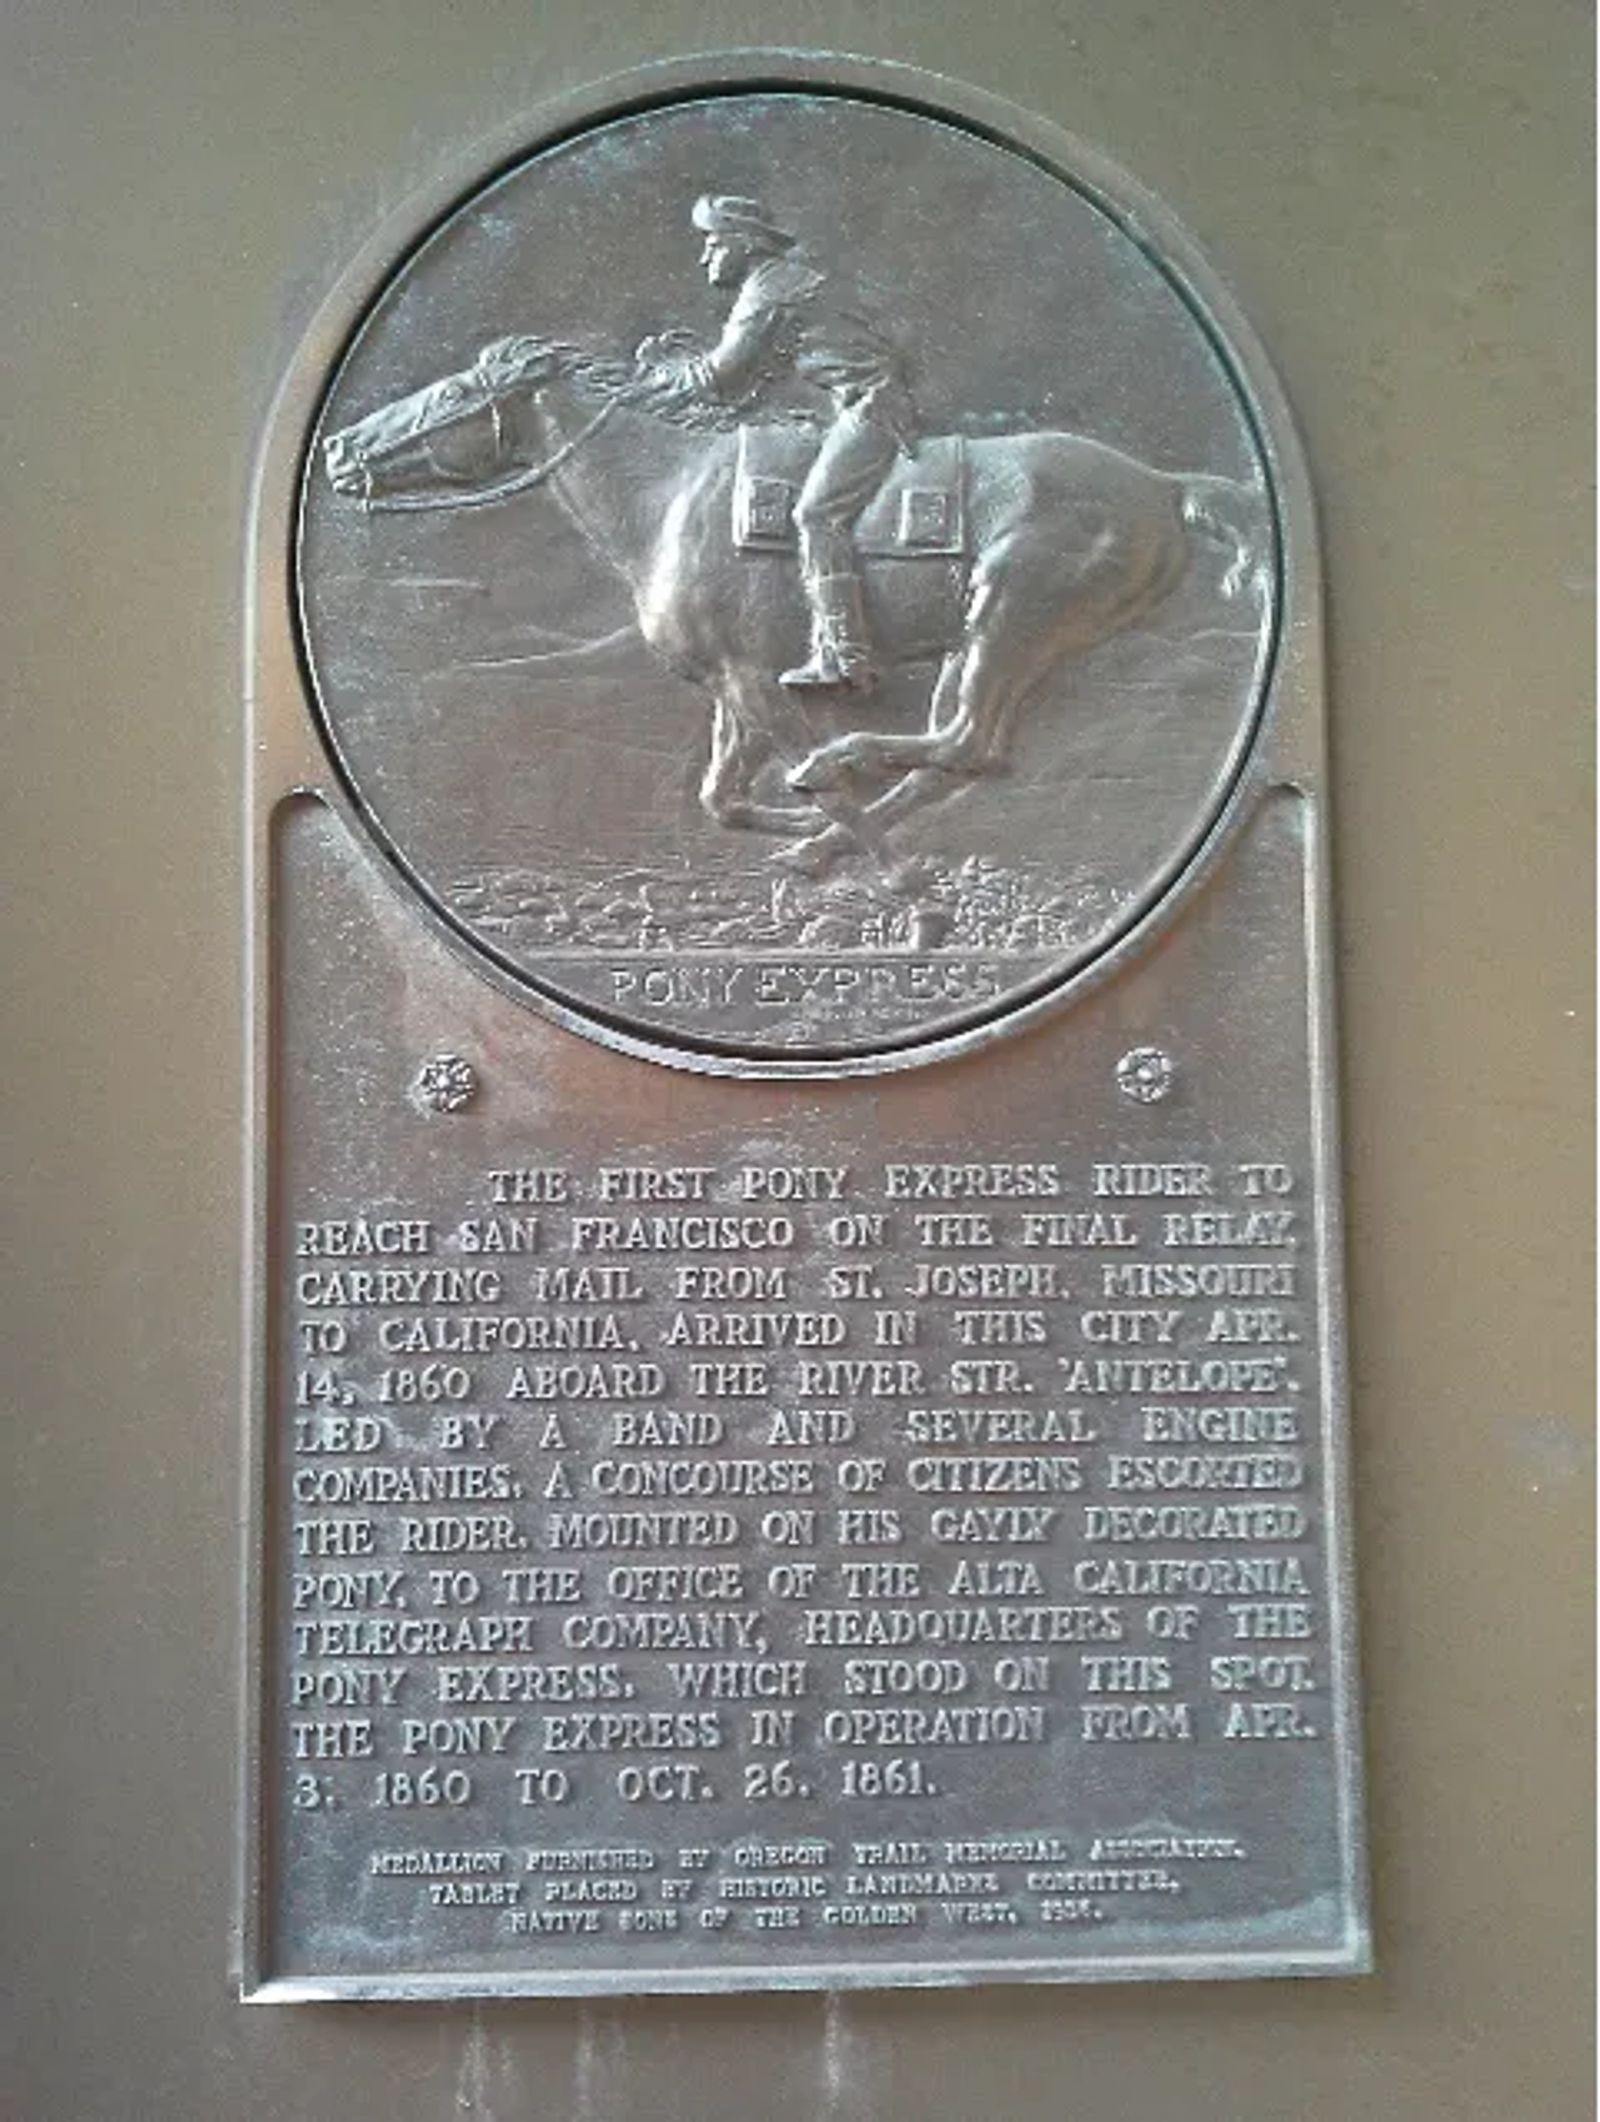 Photo of A plaque that marks the spot of the final destination of the first Pony Express ride in San Francisco, California